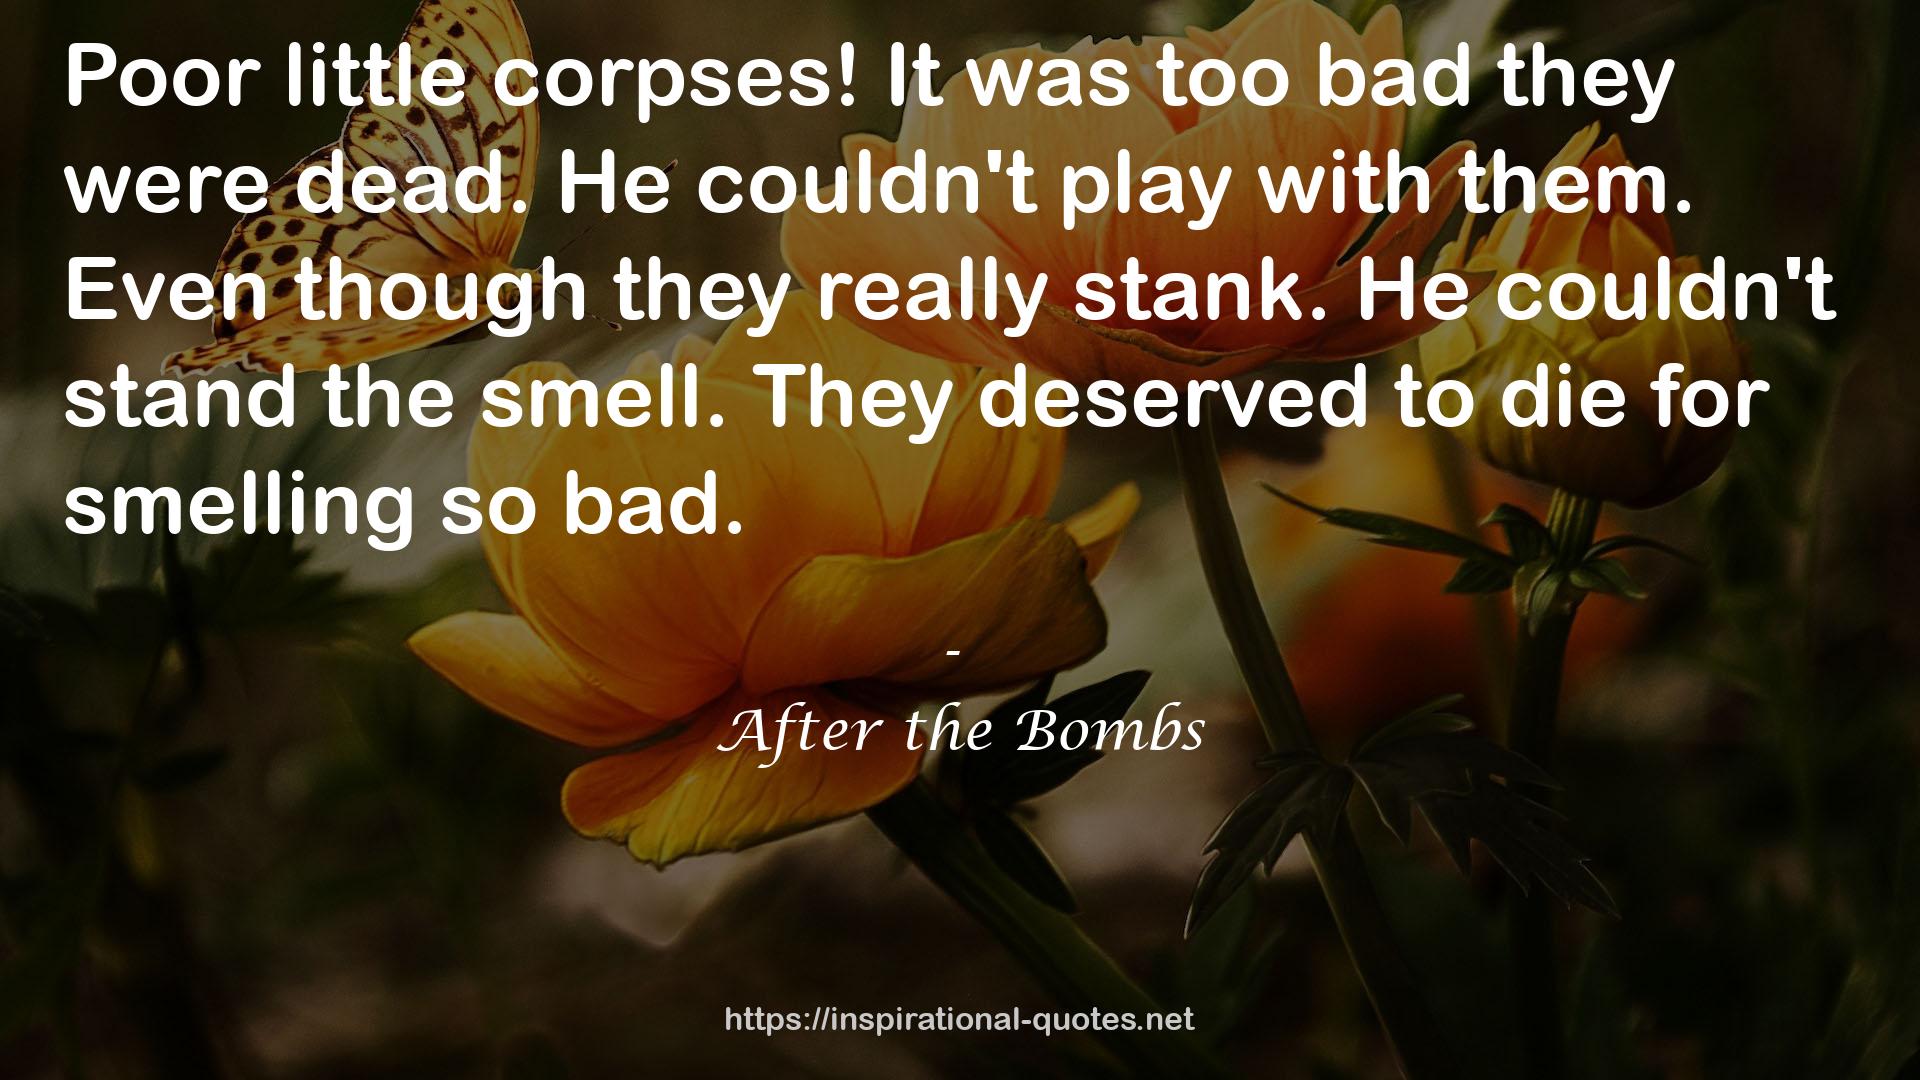 After the Bombs QUOTES